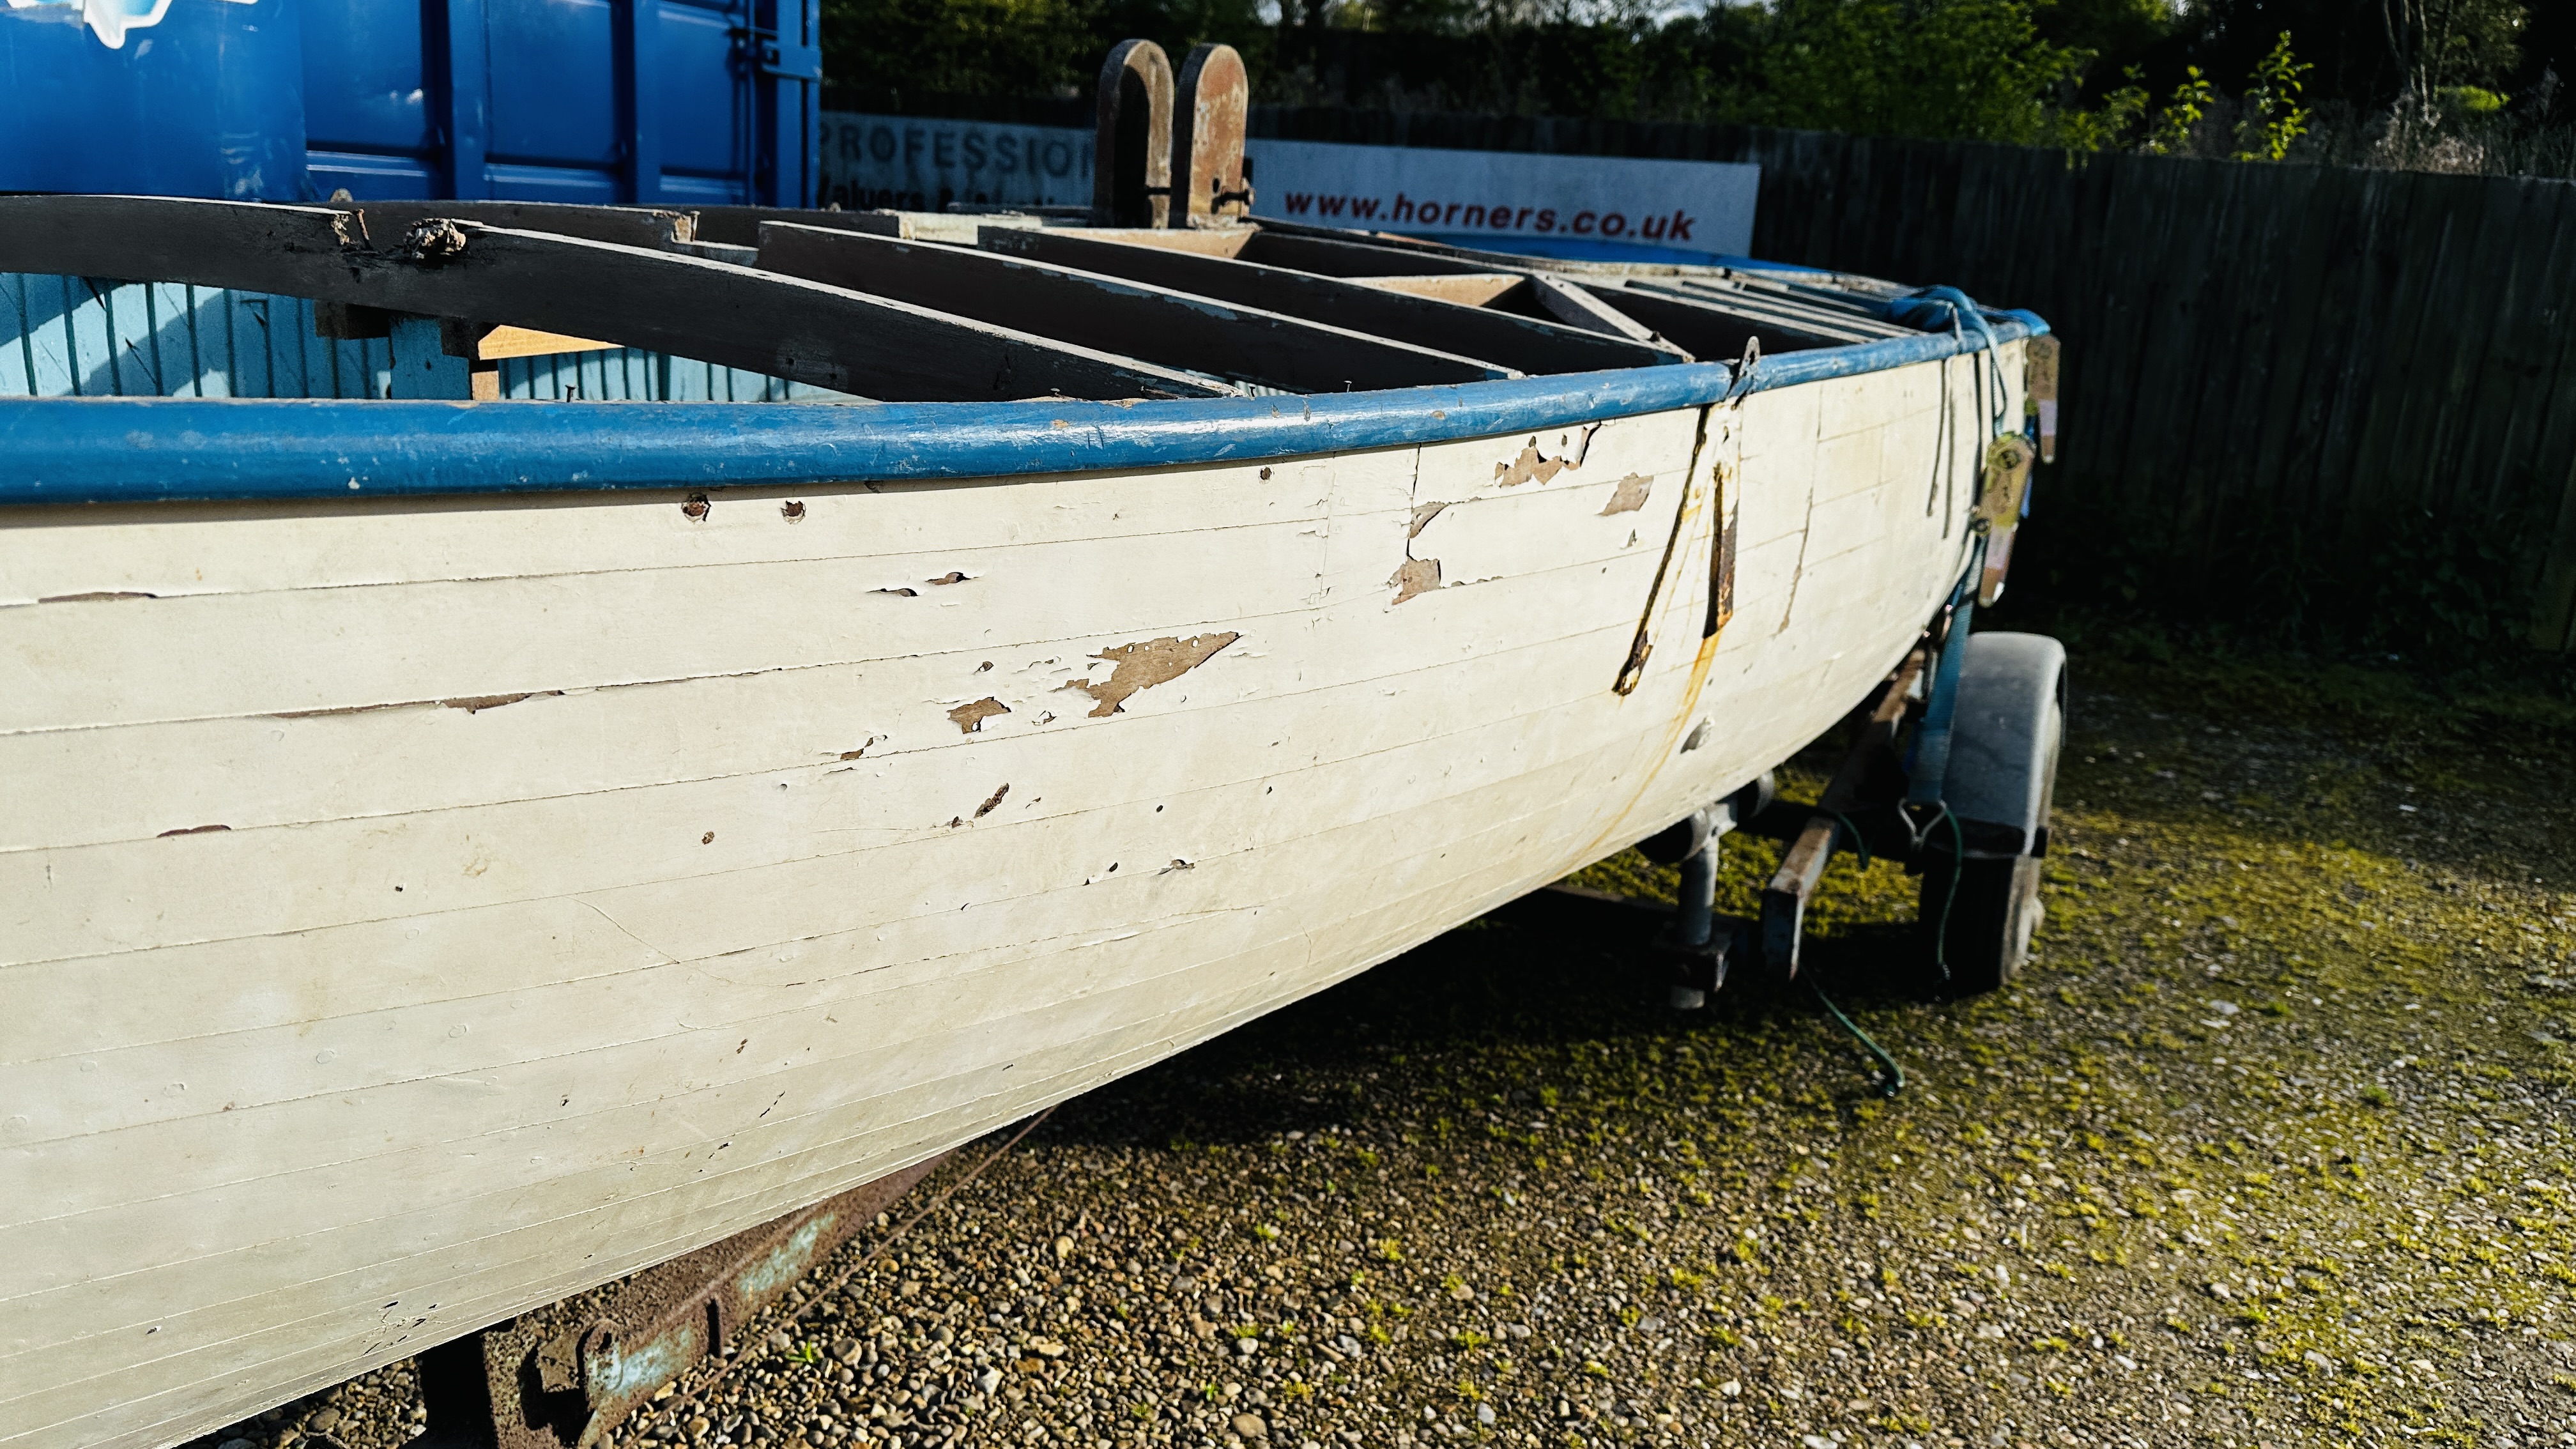 A WW2 UFFA FOX RESCUE BOAT BELIEVED TO BE BUILT BY TAYLOR WOODROW, STAMPED AW11, 1 OF 402 MADE, - Image 32 of 56